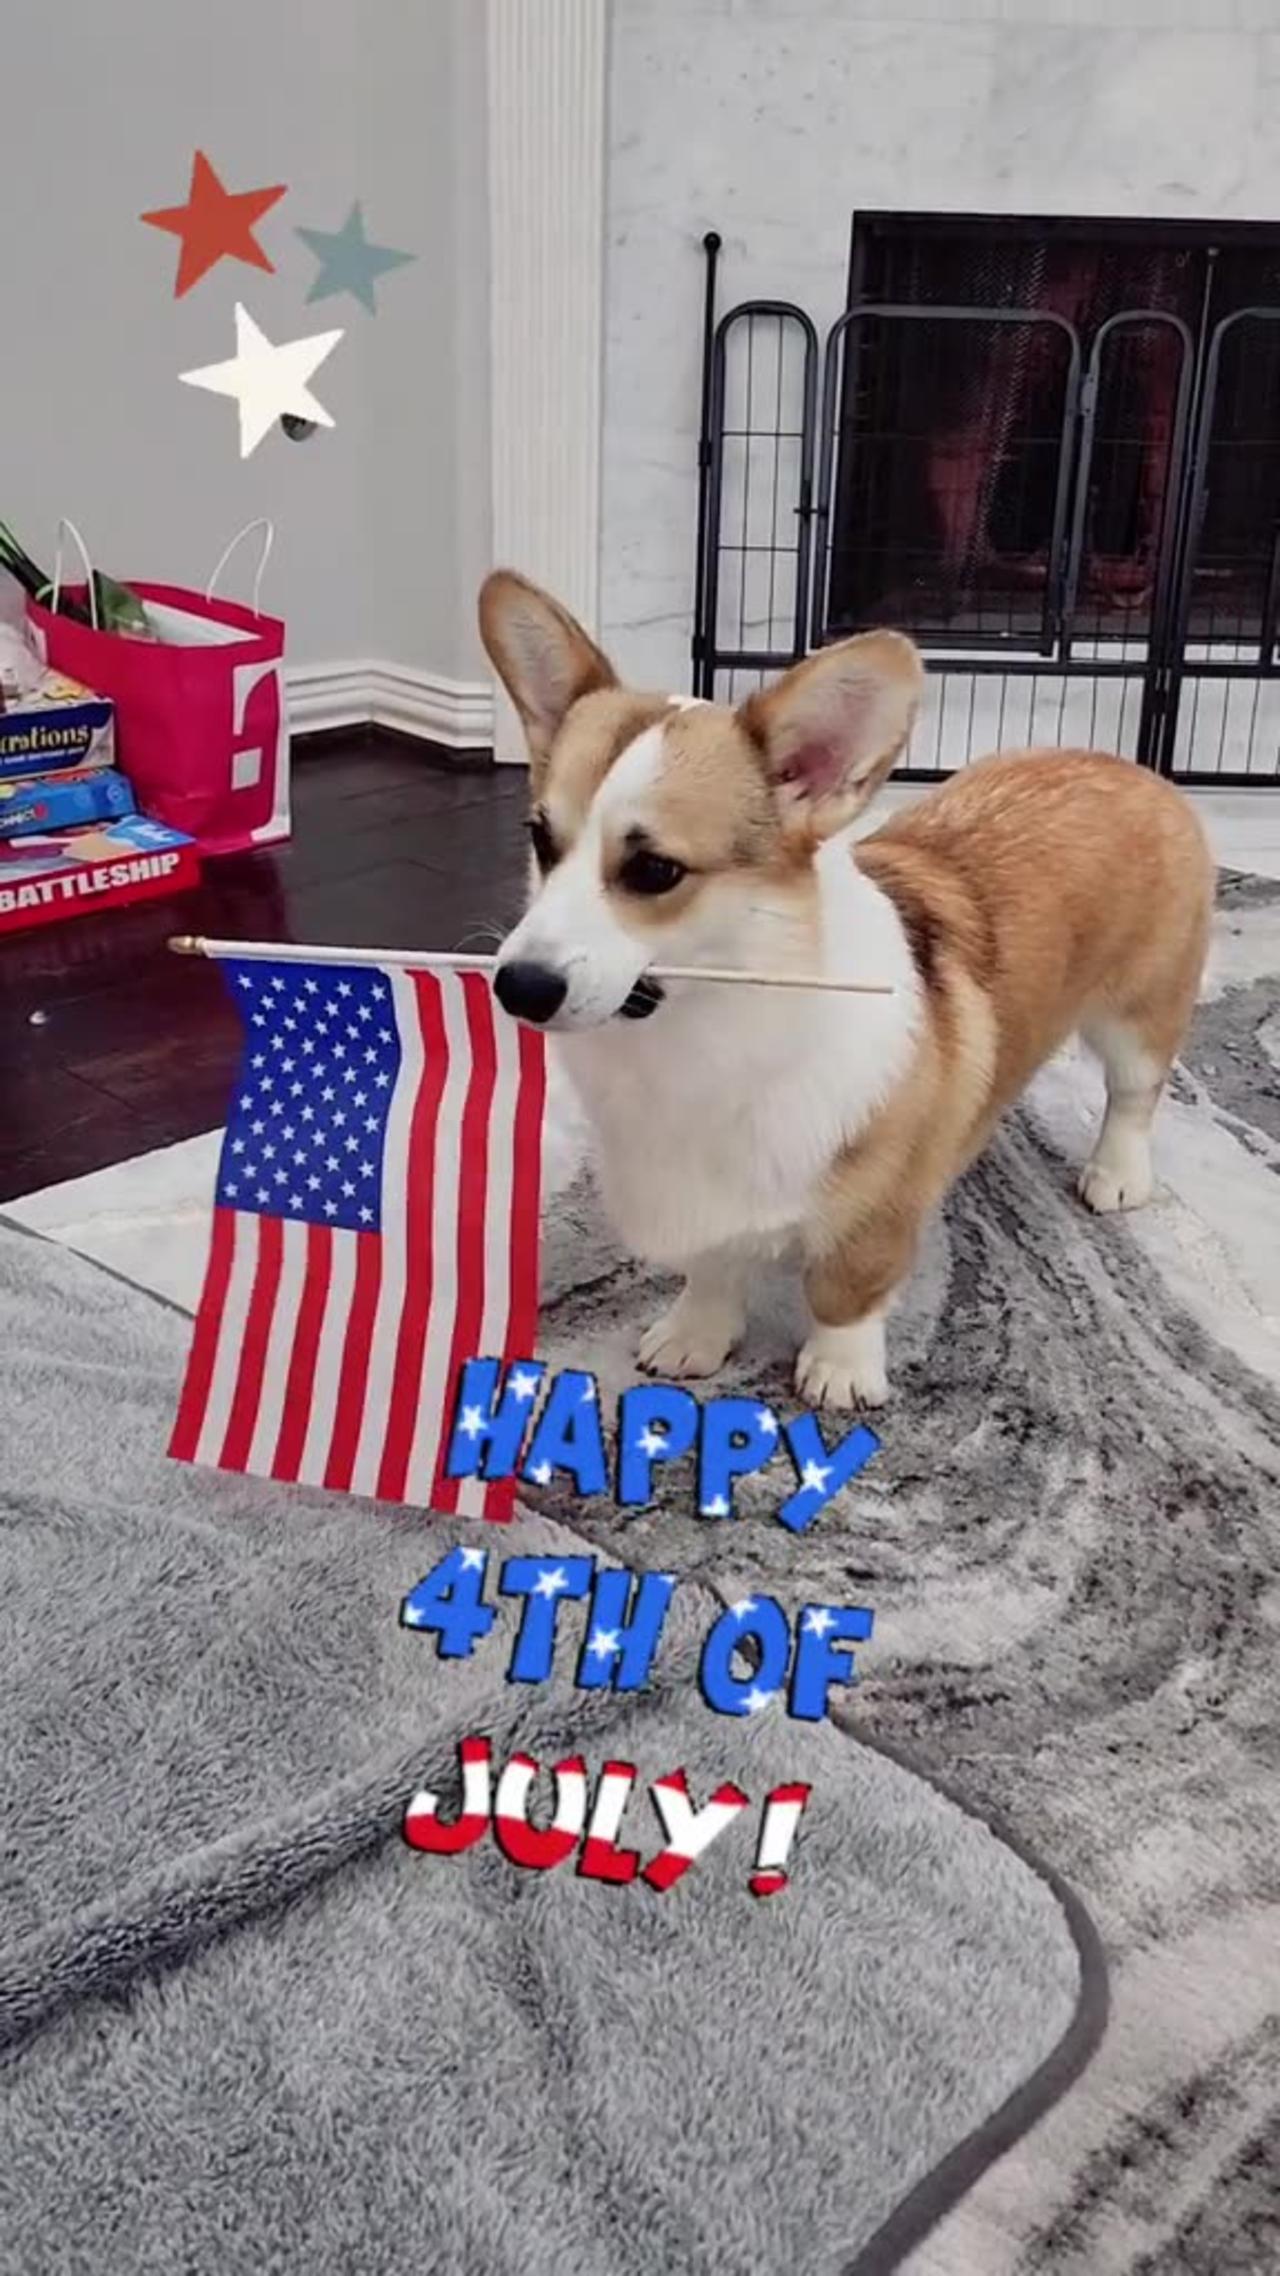 Don't bark too much at the pawrents! Happy 4th! 🐶🎆